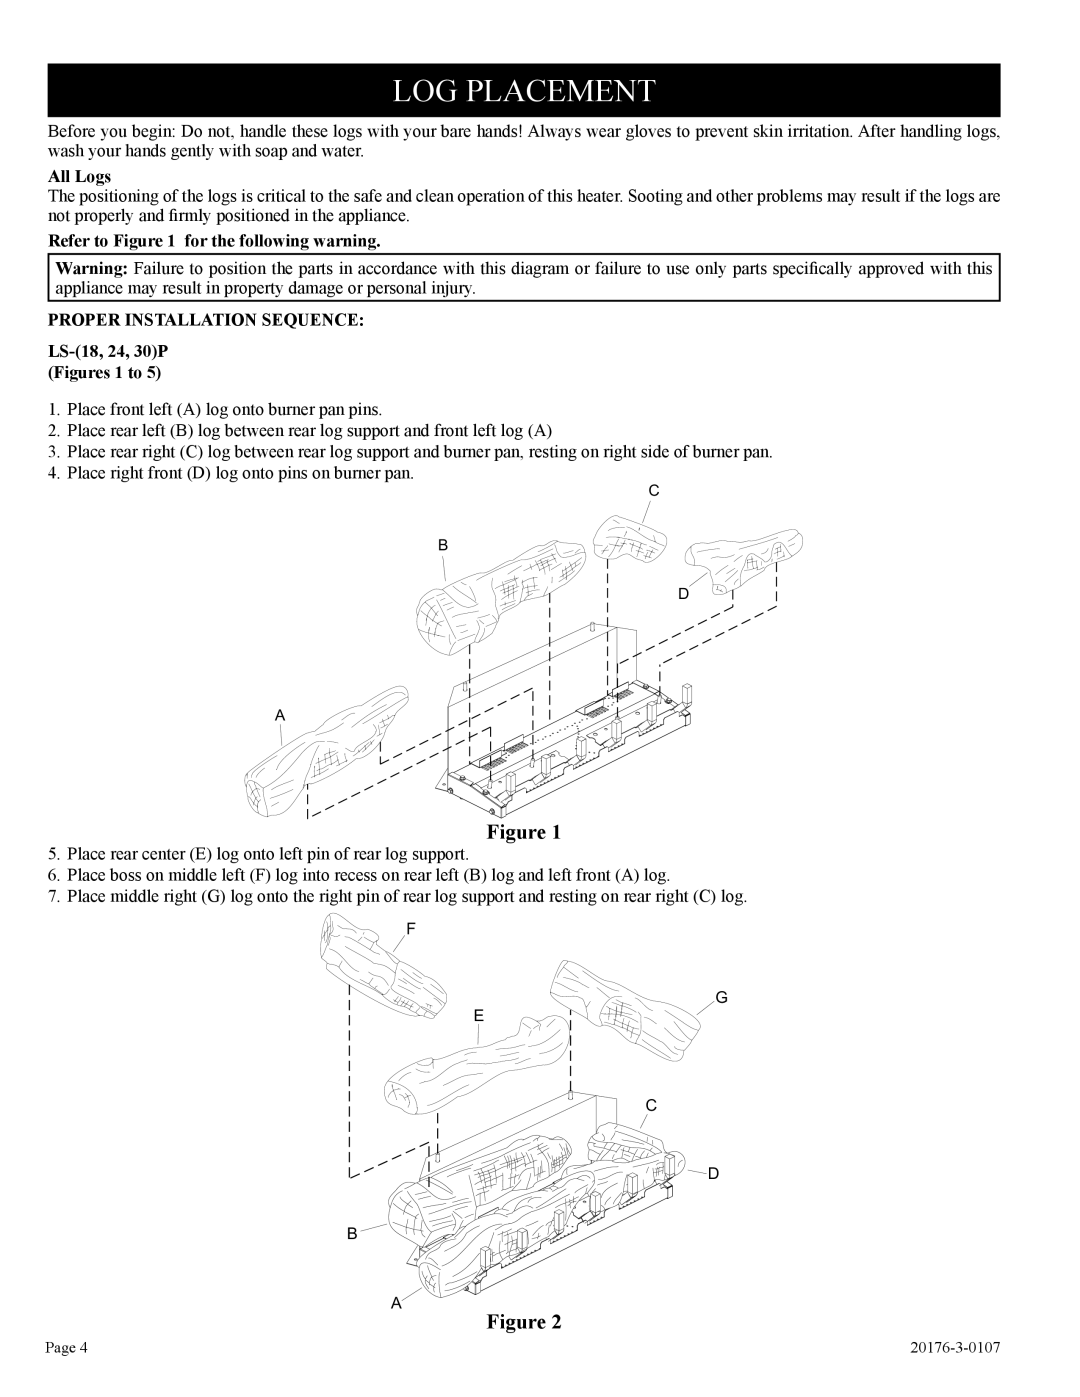 Empire Comfort Systems LS-18P-1, LS-30P-1, LS-24P-1 installation instructions Log Placement 